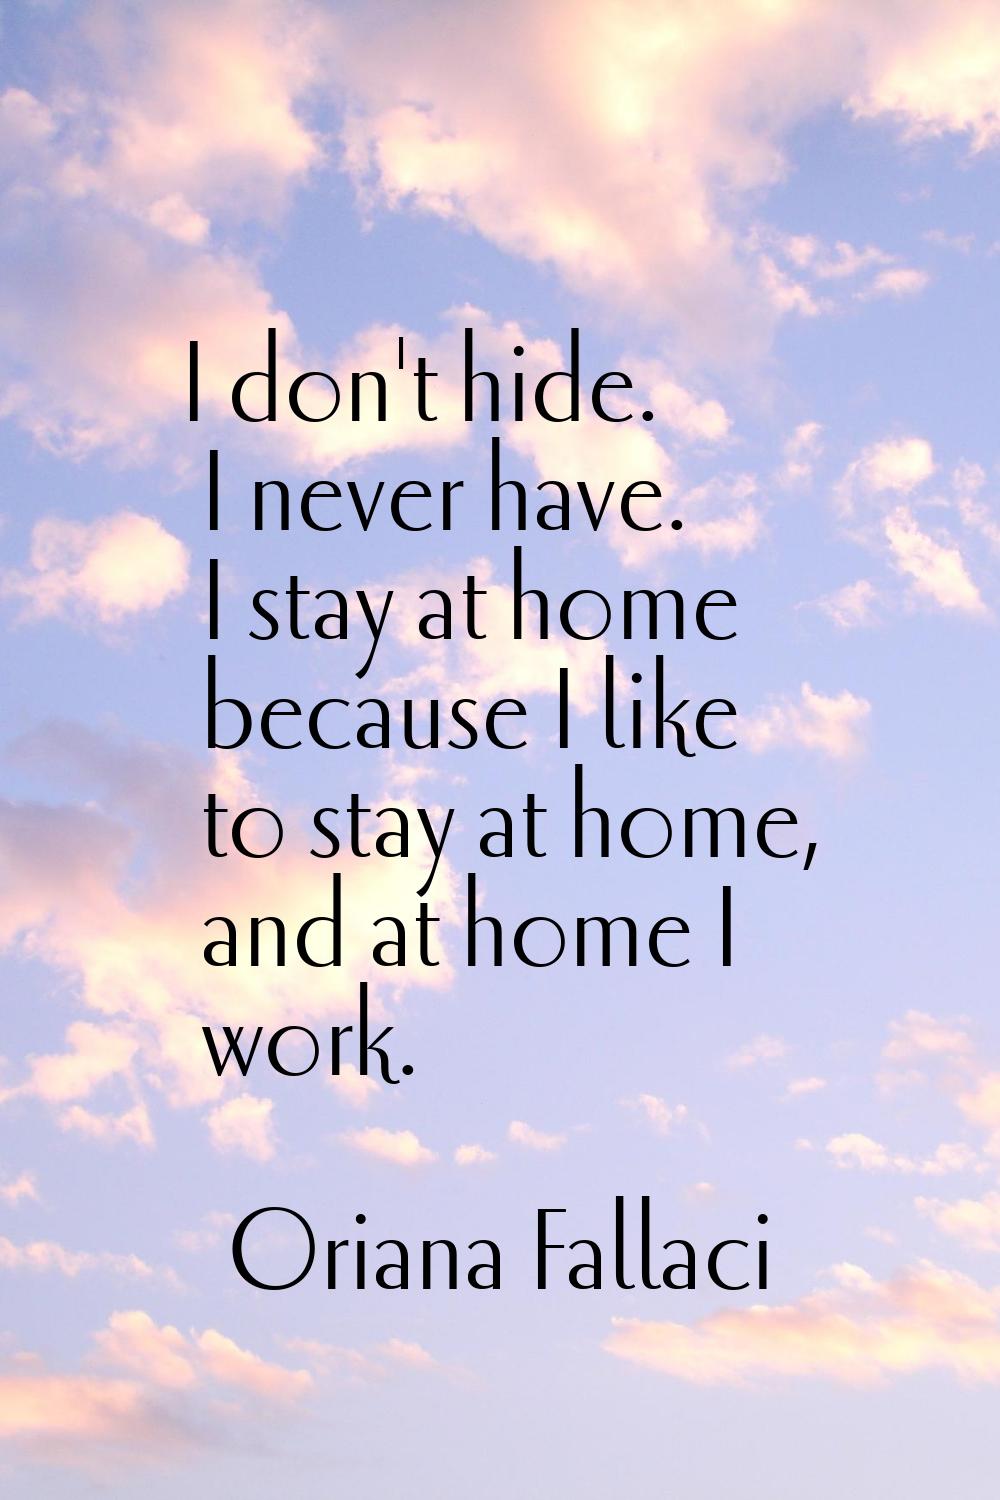 I don't hide. I never have. I stay at home because I like to stay at home, and at home I work.